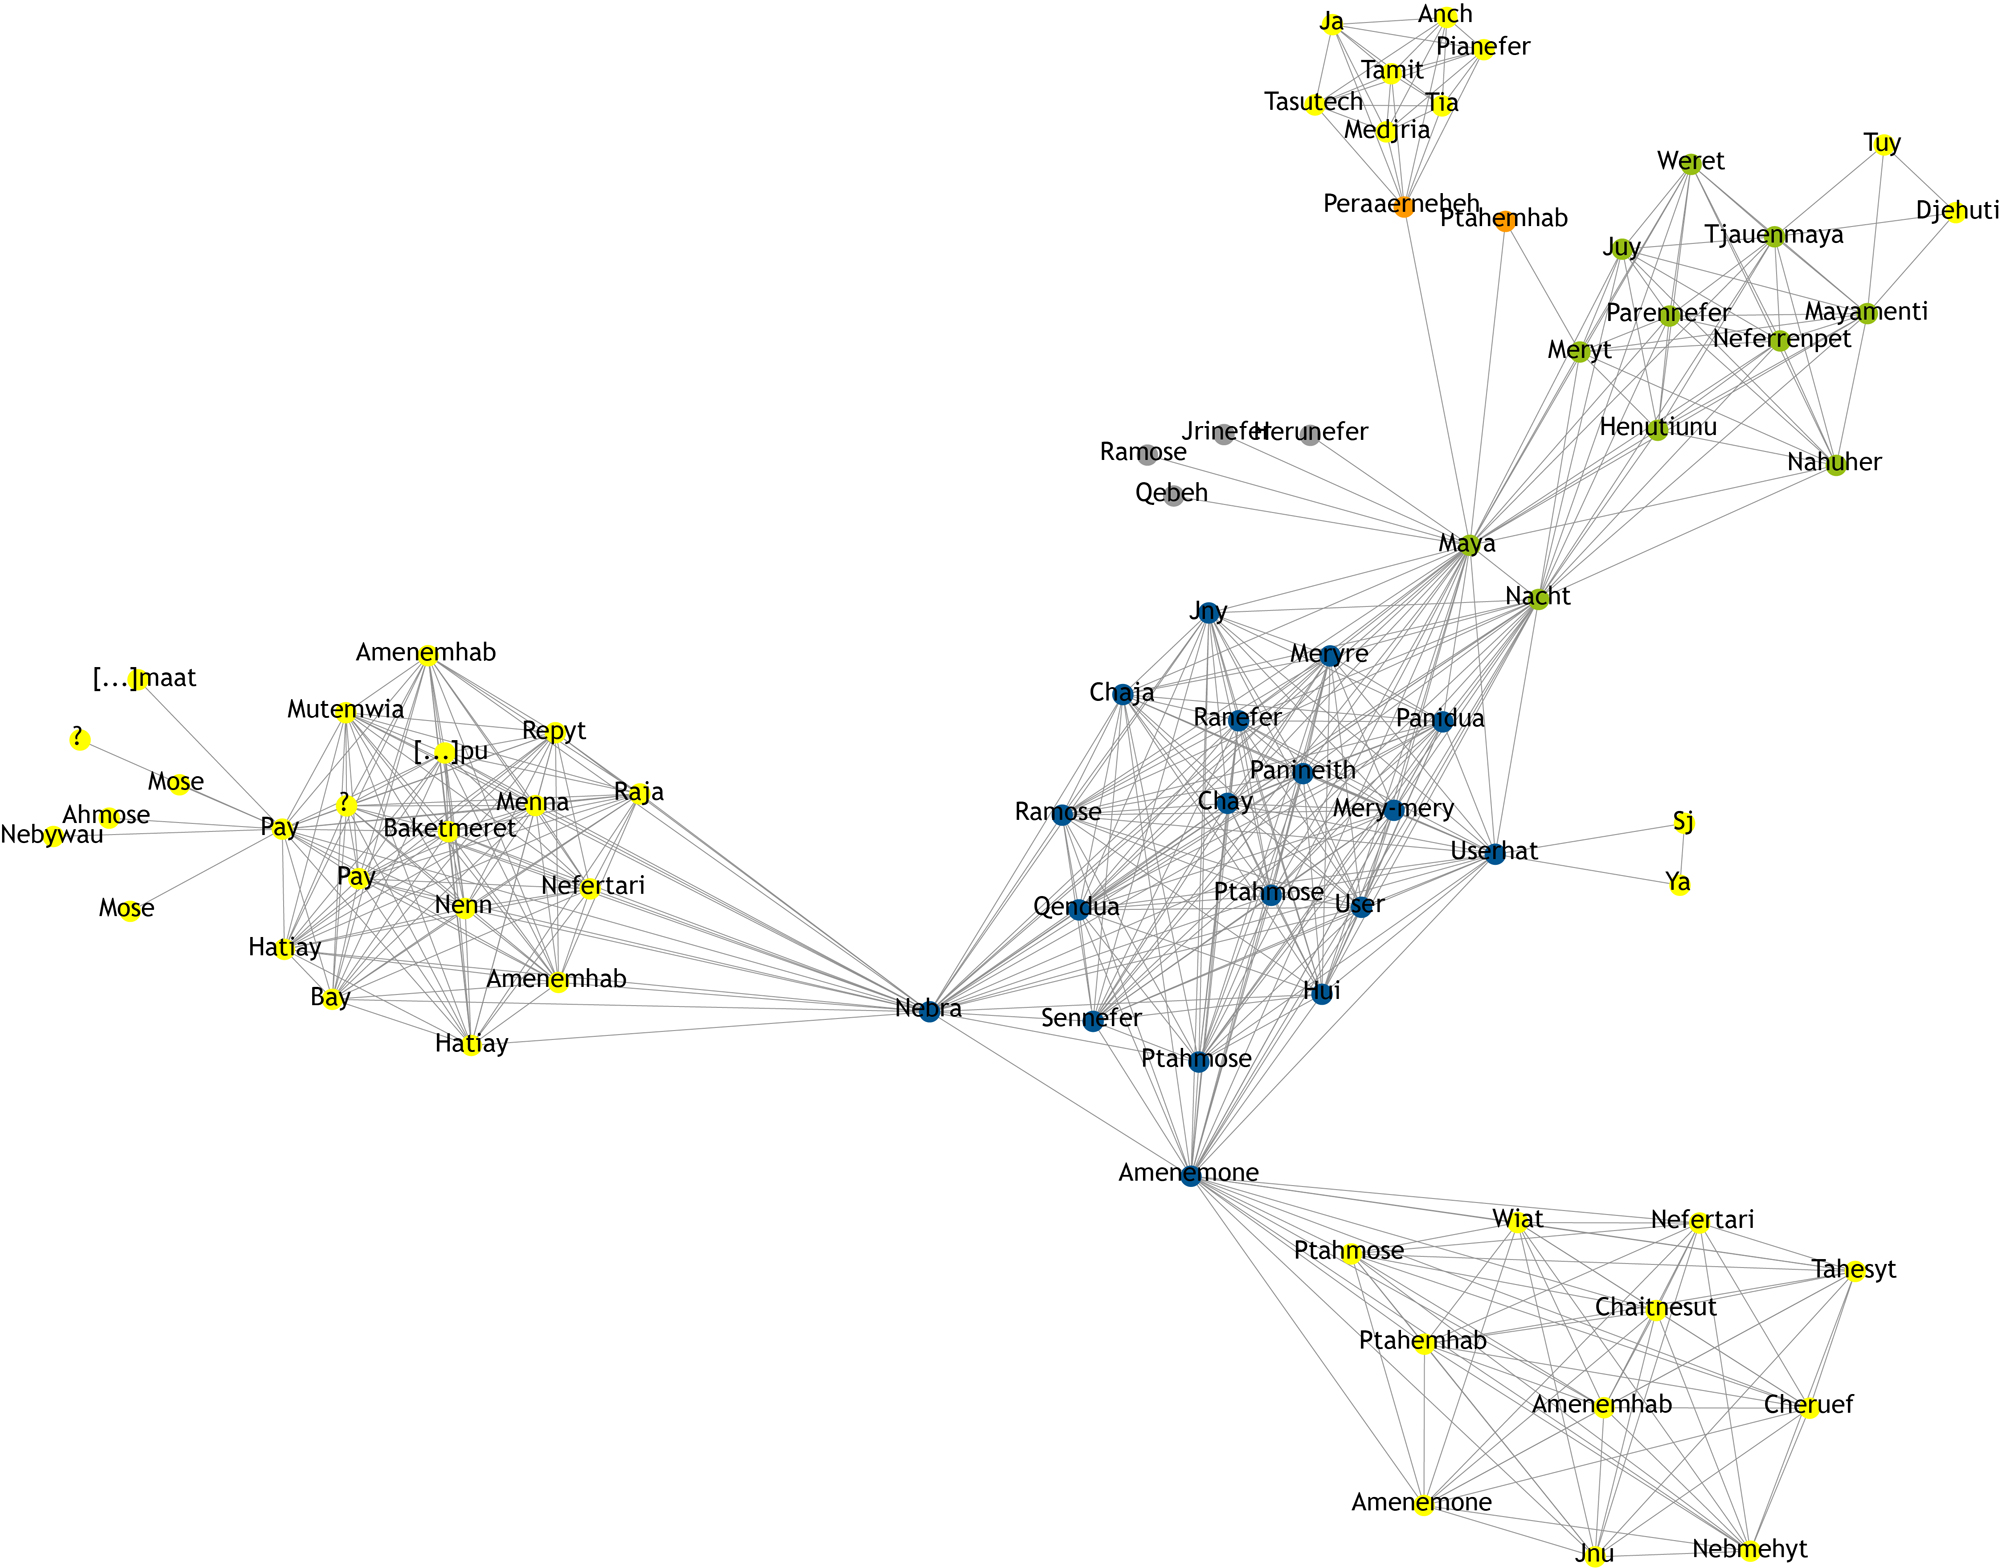 Pilot case network of king's treasurer Maya. Network graph created by Gephi.